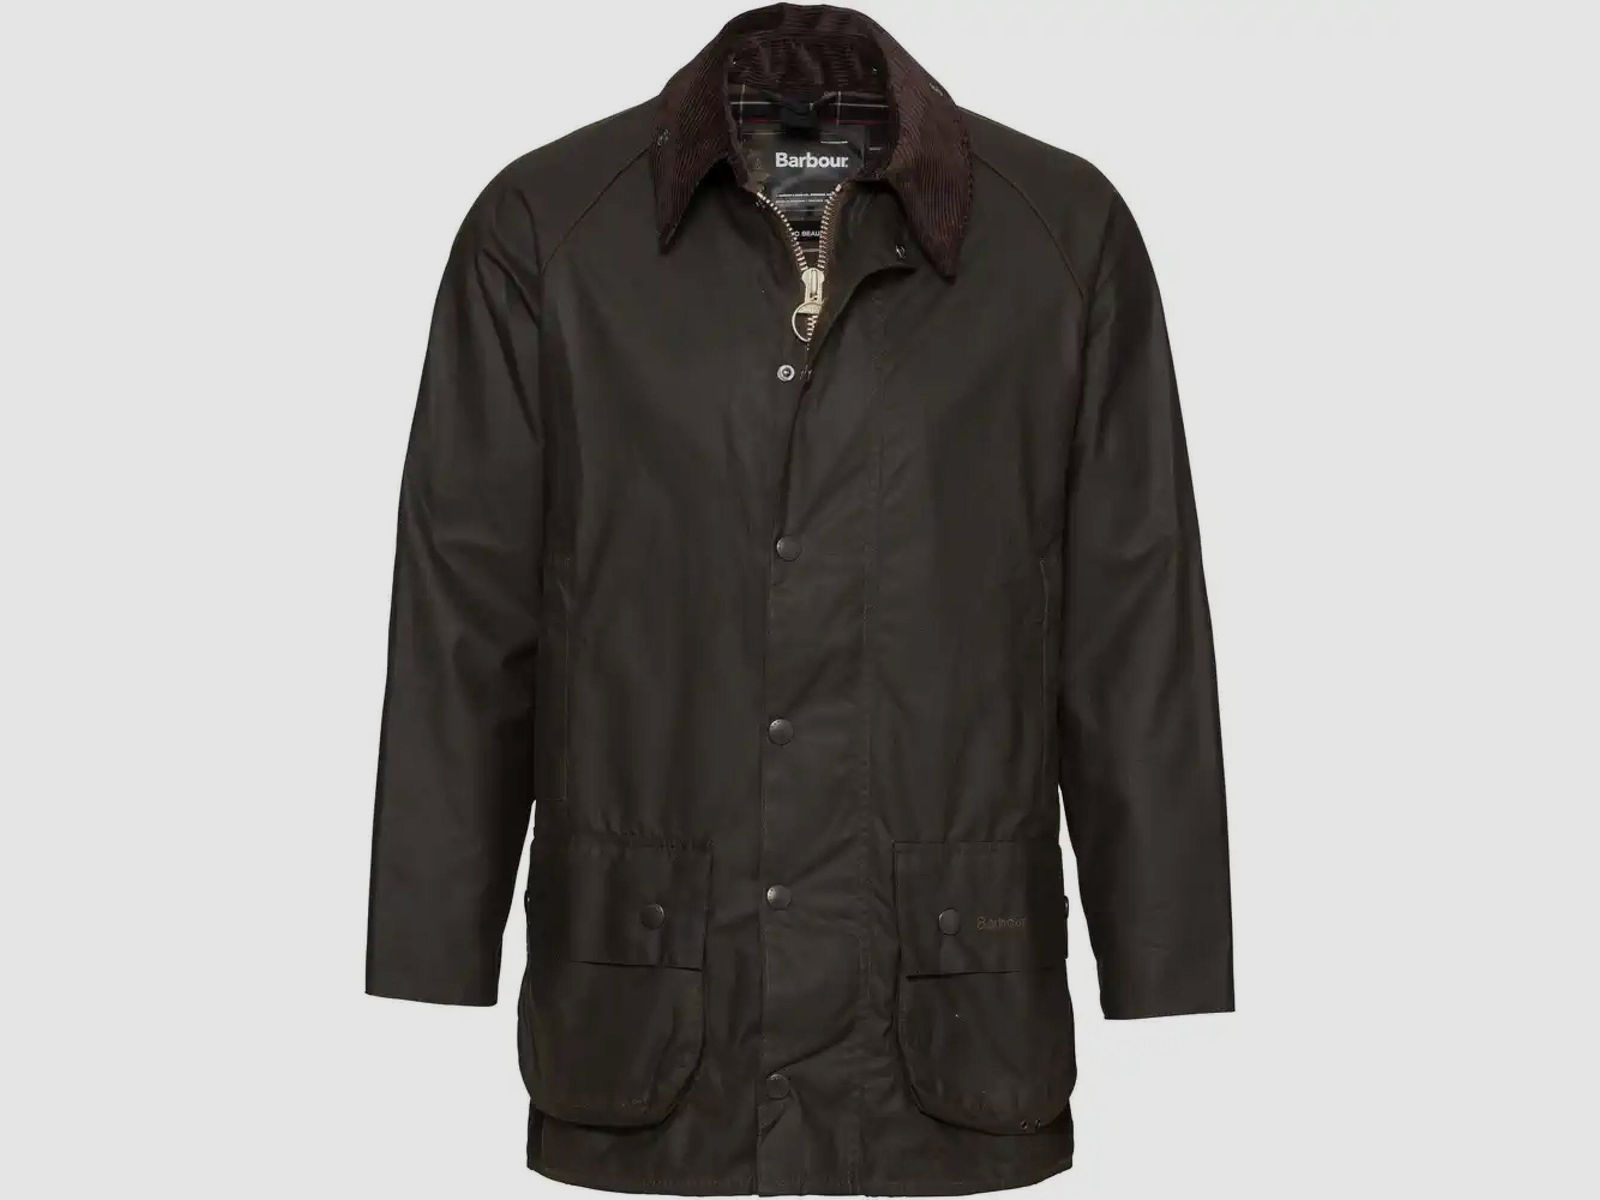 Barbour Wachsjacke Classic Beaufort, Farbe Olive 48